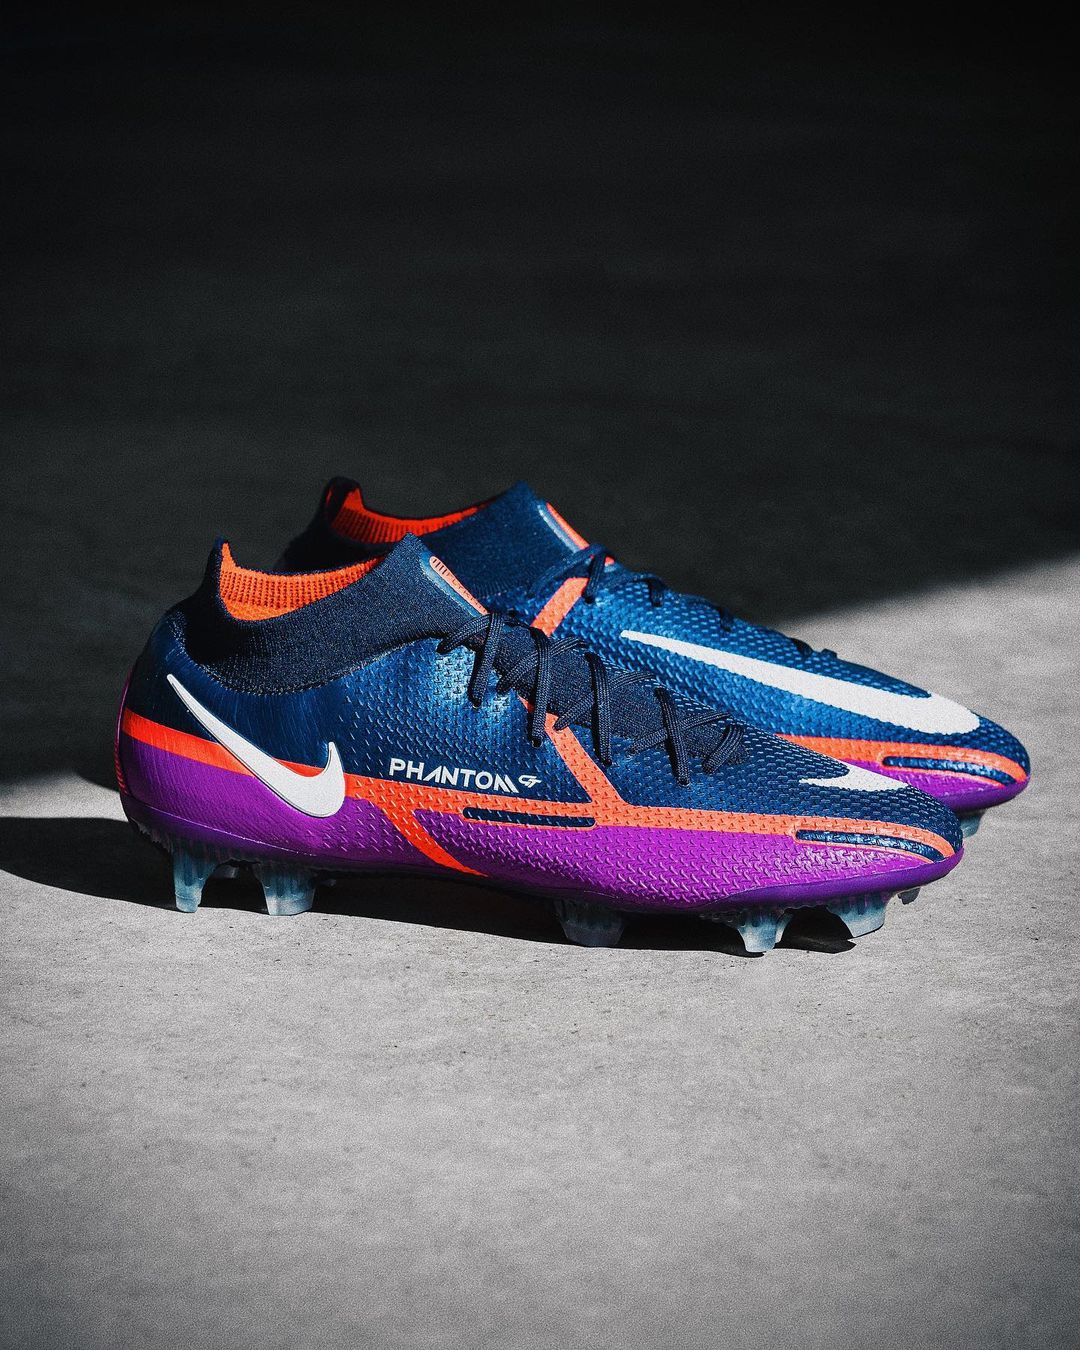 Pro:Direct Soccer US on Twitter: "Show your skills with the new Nike Phantom GT II UV 🔥 now at Pro:Direct Soccer US 📲 Shop 🛒 https://t.co/r6Of5hbnfQ https://t.co/wnqzIbM3Jw" / Twitter